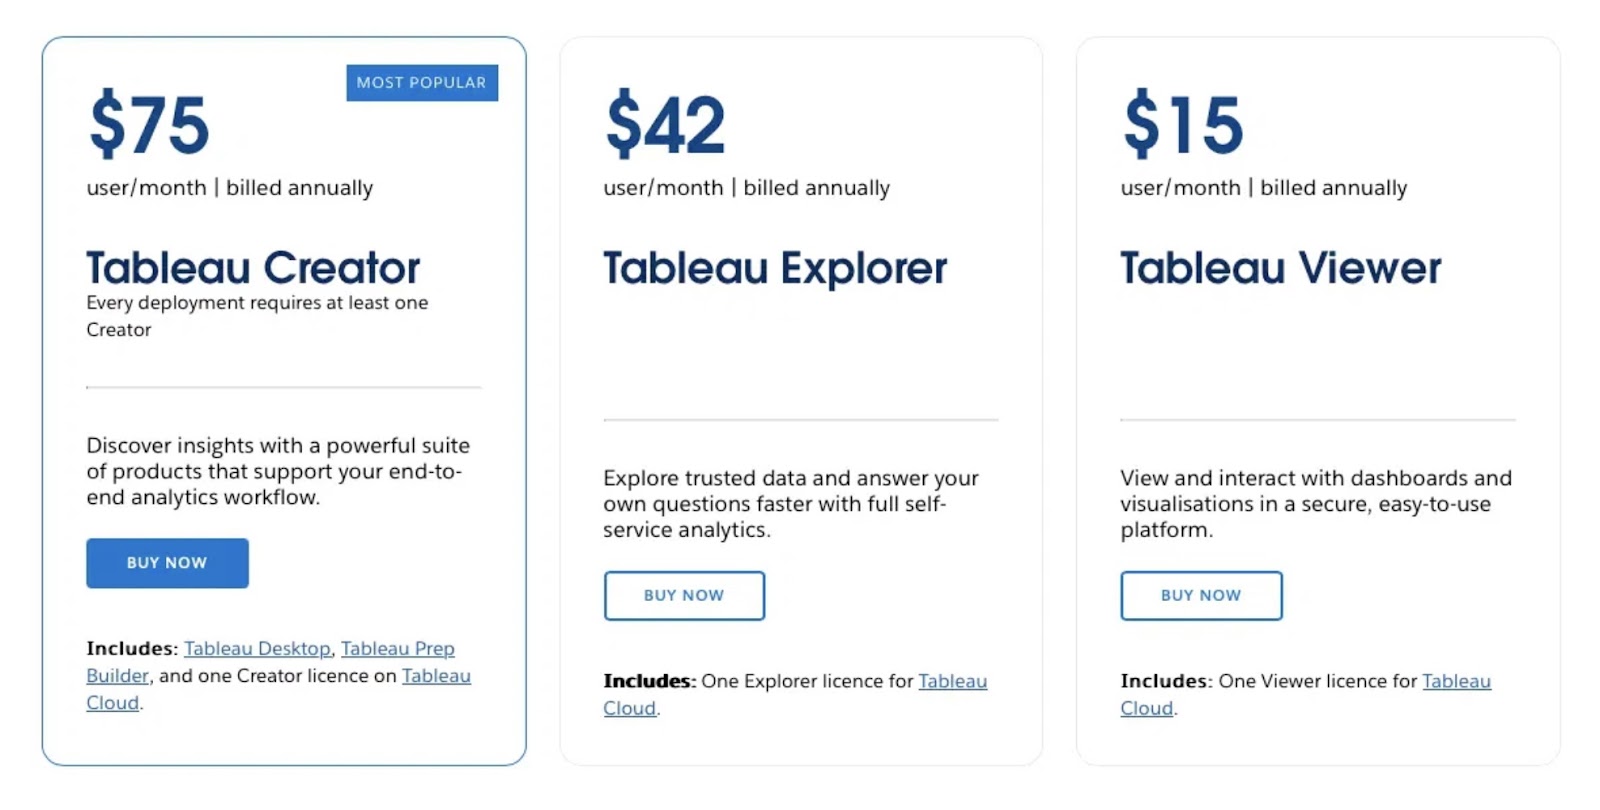 Pricing page on "Tableau" showing their three different plans along with the pricing & details for each.